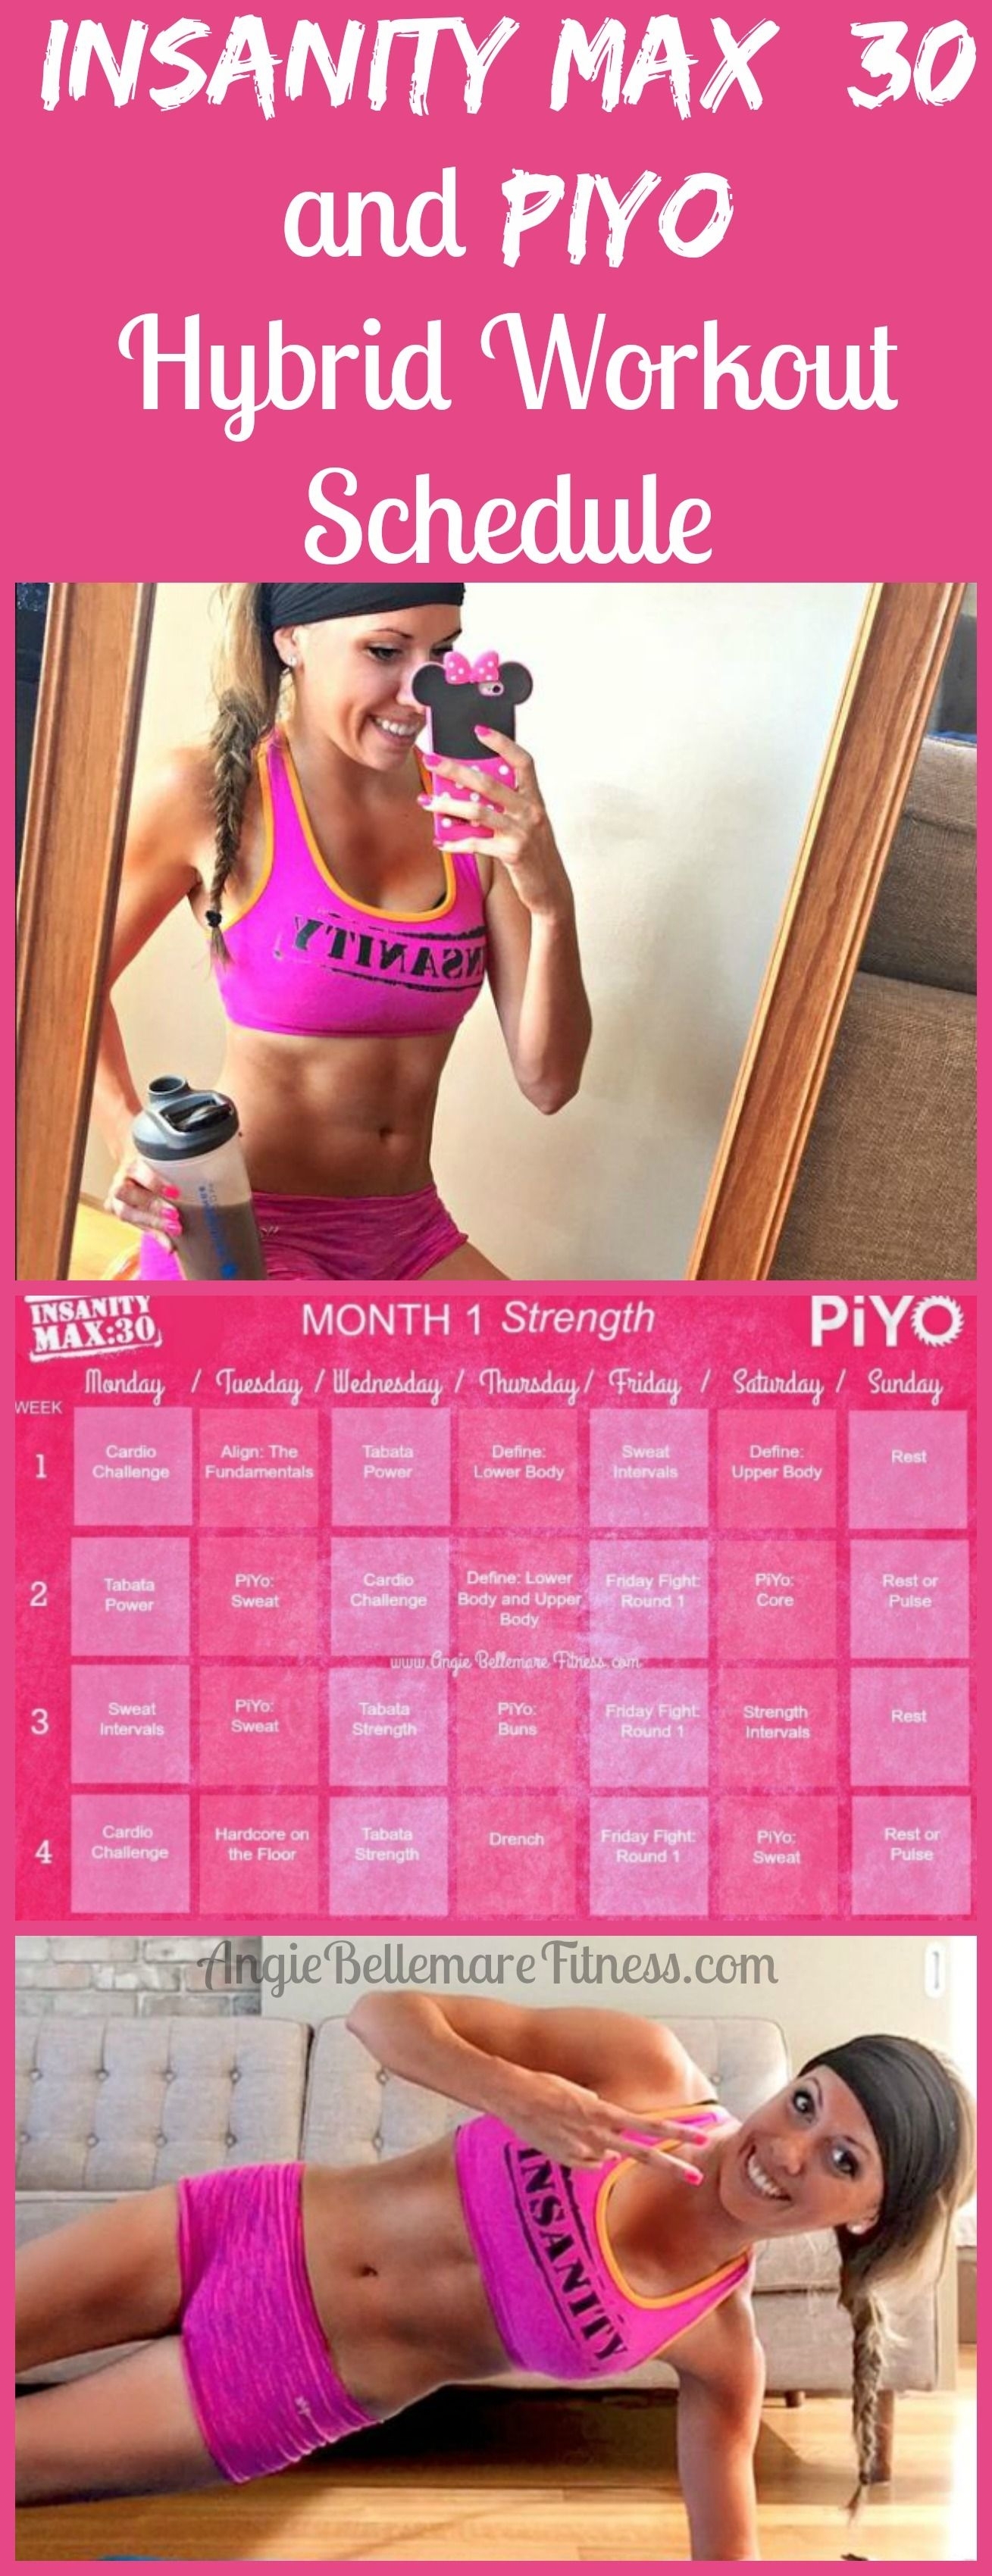 Click The Pin To See My Hybrid Calendar Of Two Of My Favorite with regard to Insanity Max 30/piyo Hybrid Calendar